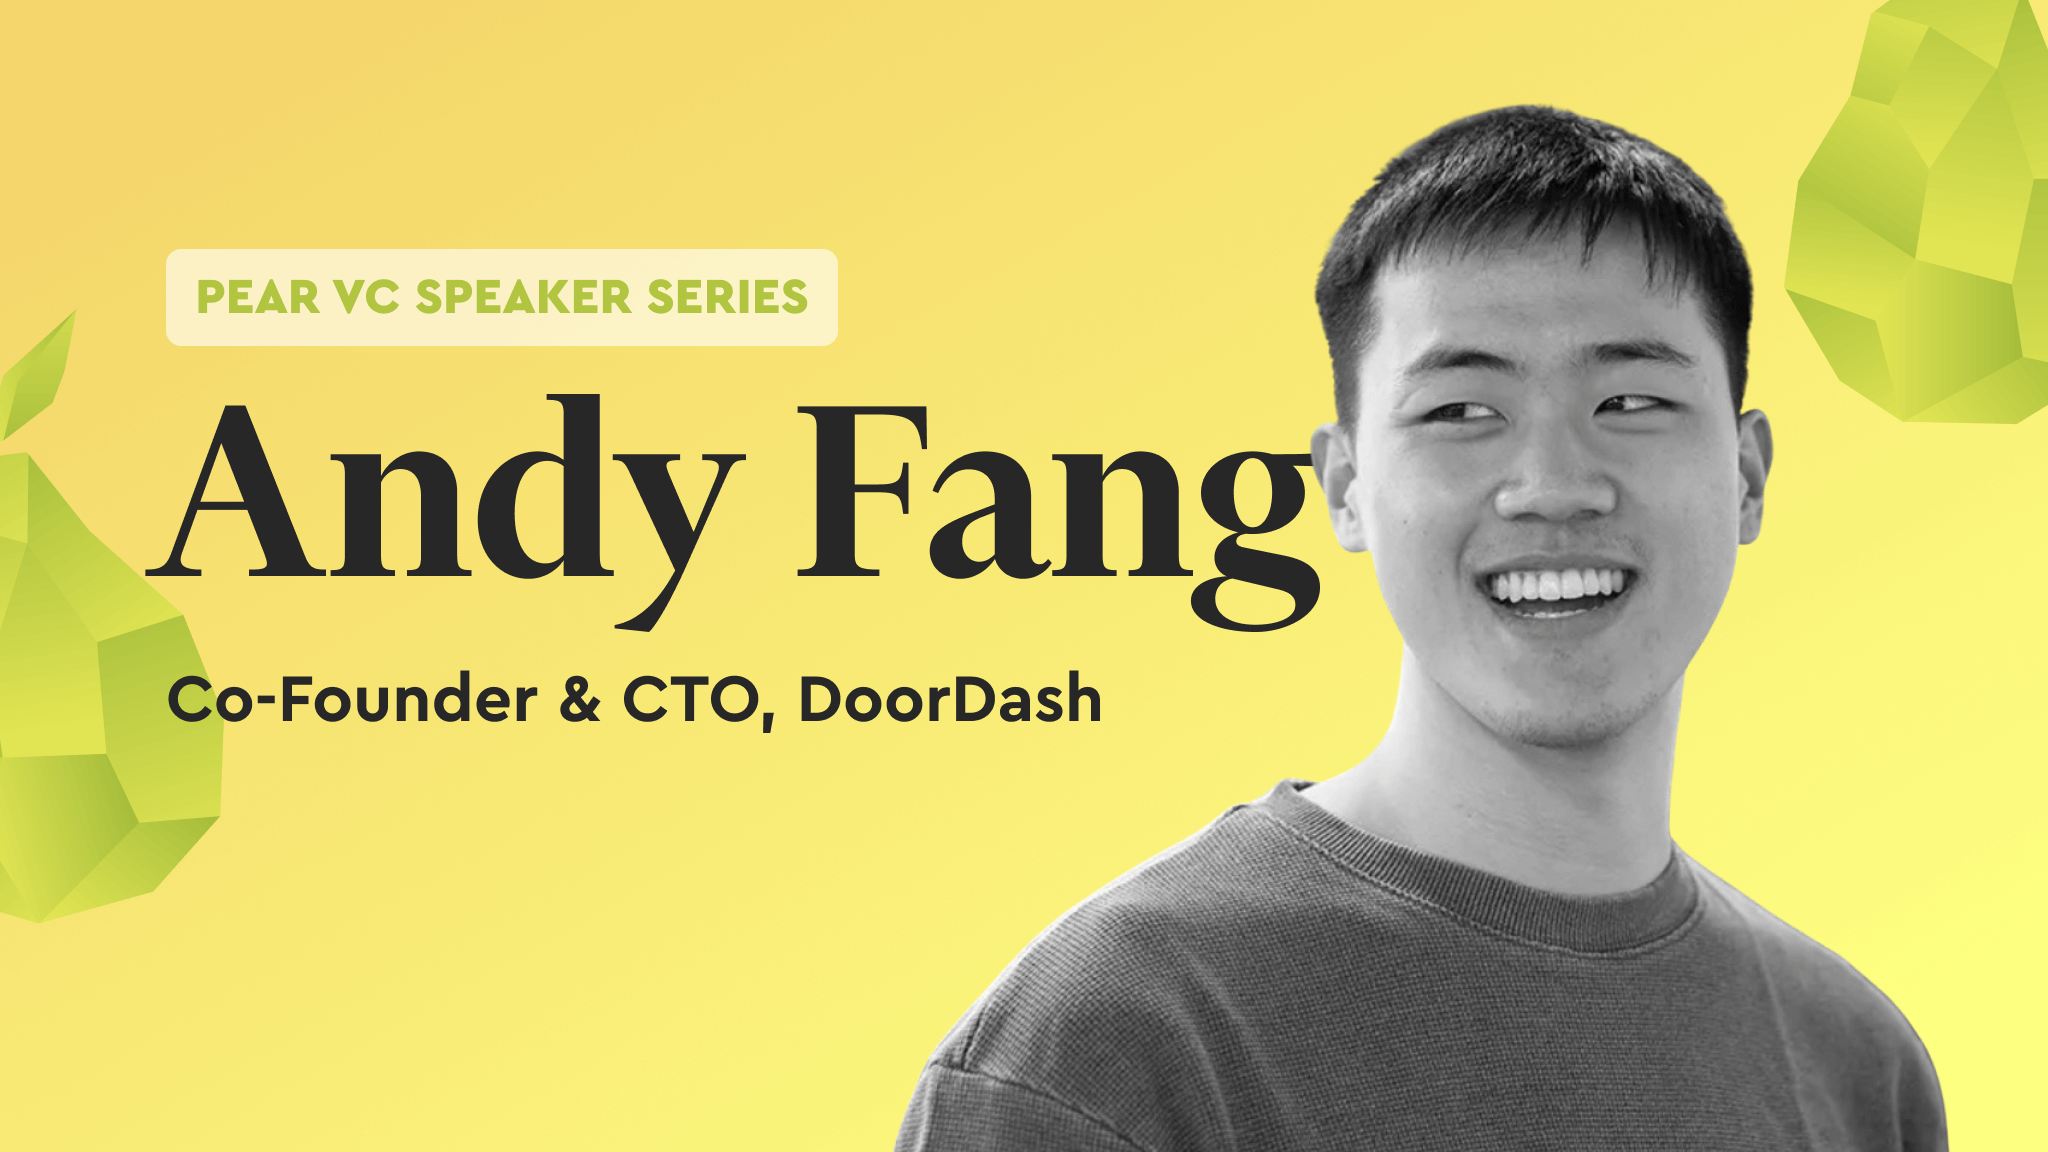 Pear VC Speaker Series: Andy Fang